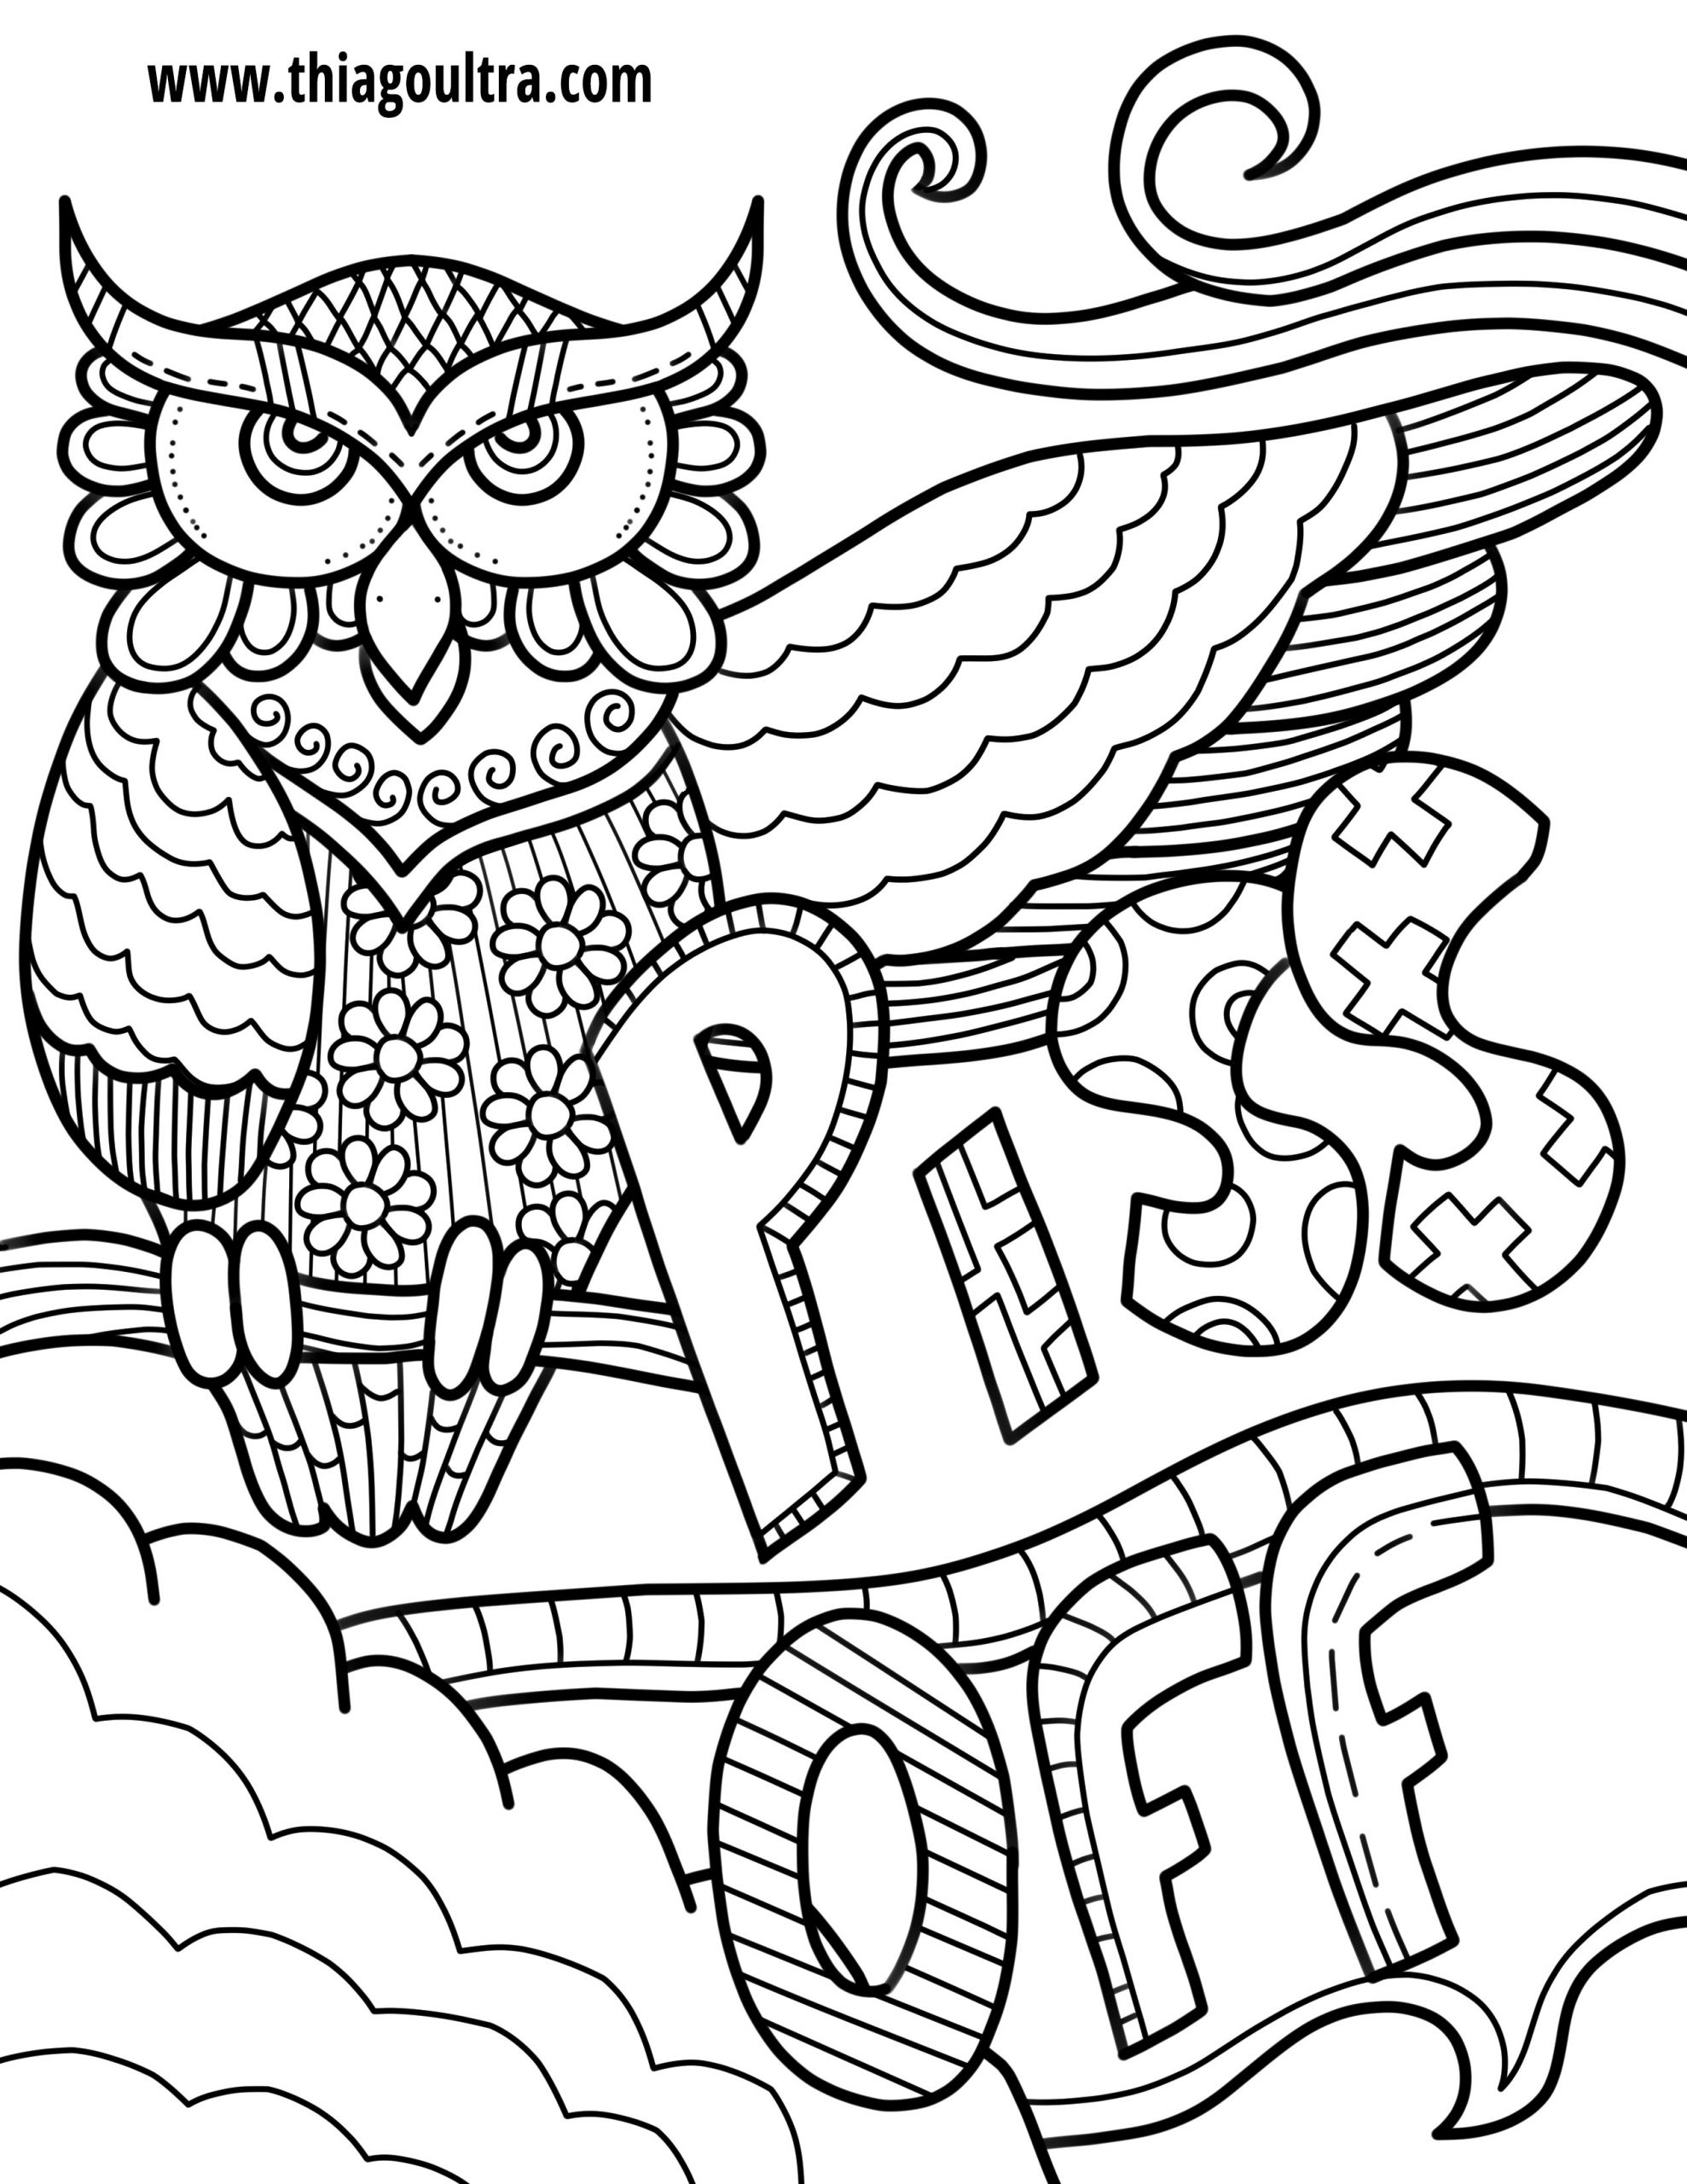 Adult Swear Coloring Pages
 Adult Swear Coloring Pages at GetDrawings